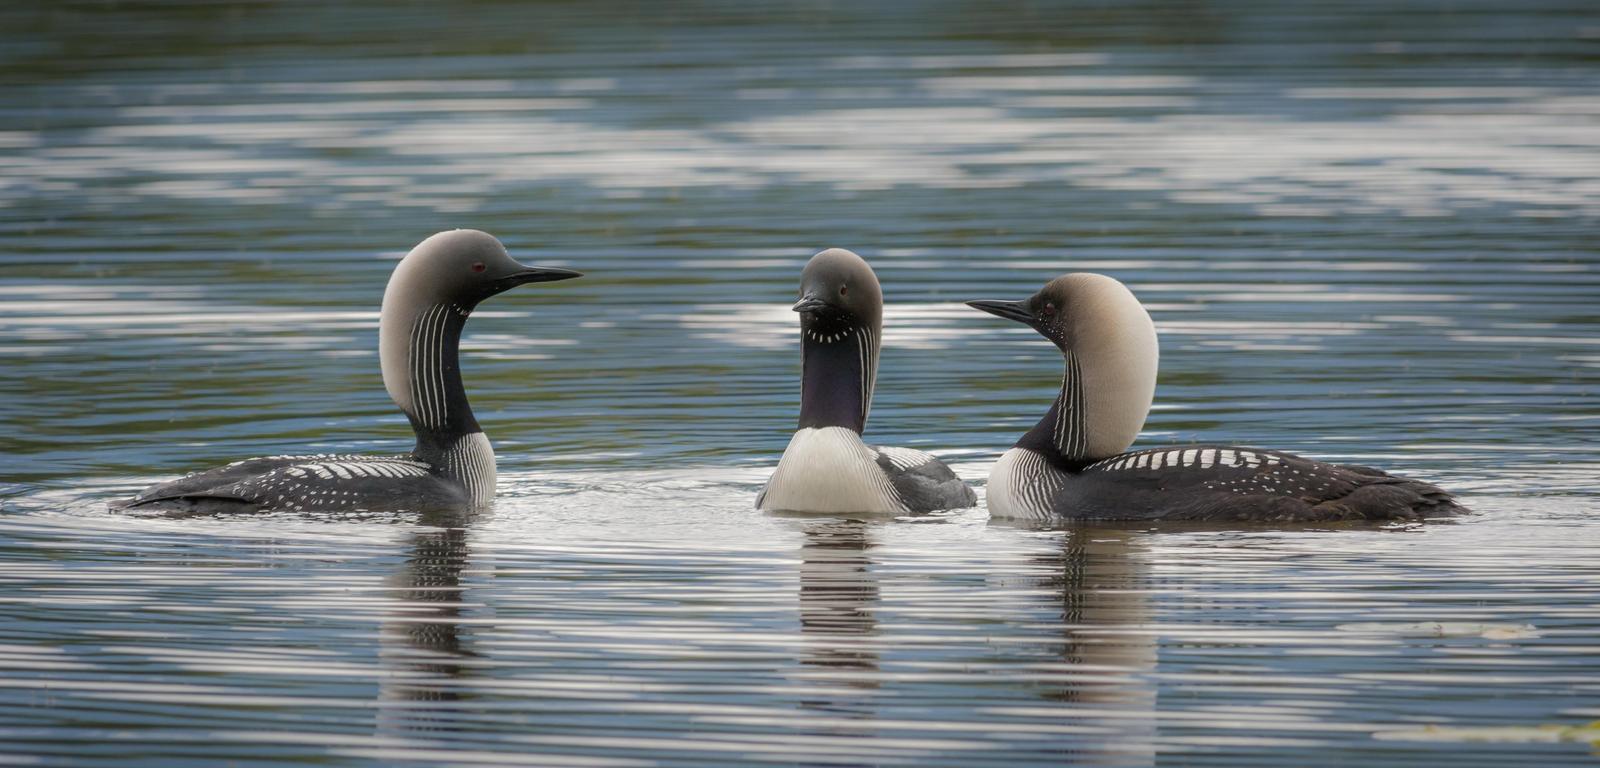 Pacific Loon Photo by Jesse Hodges